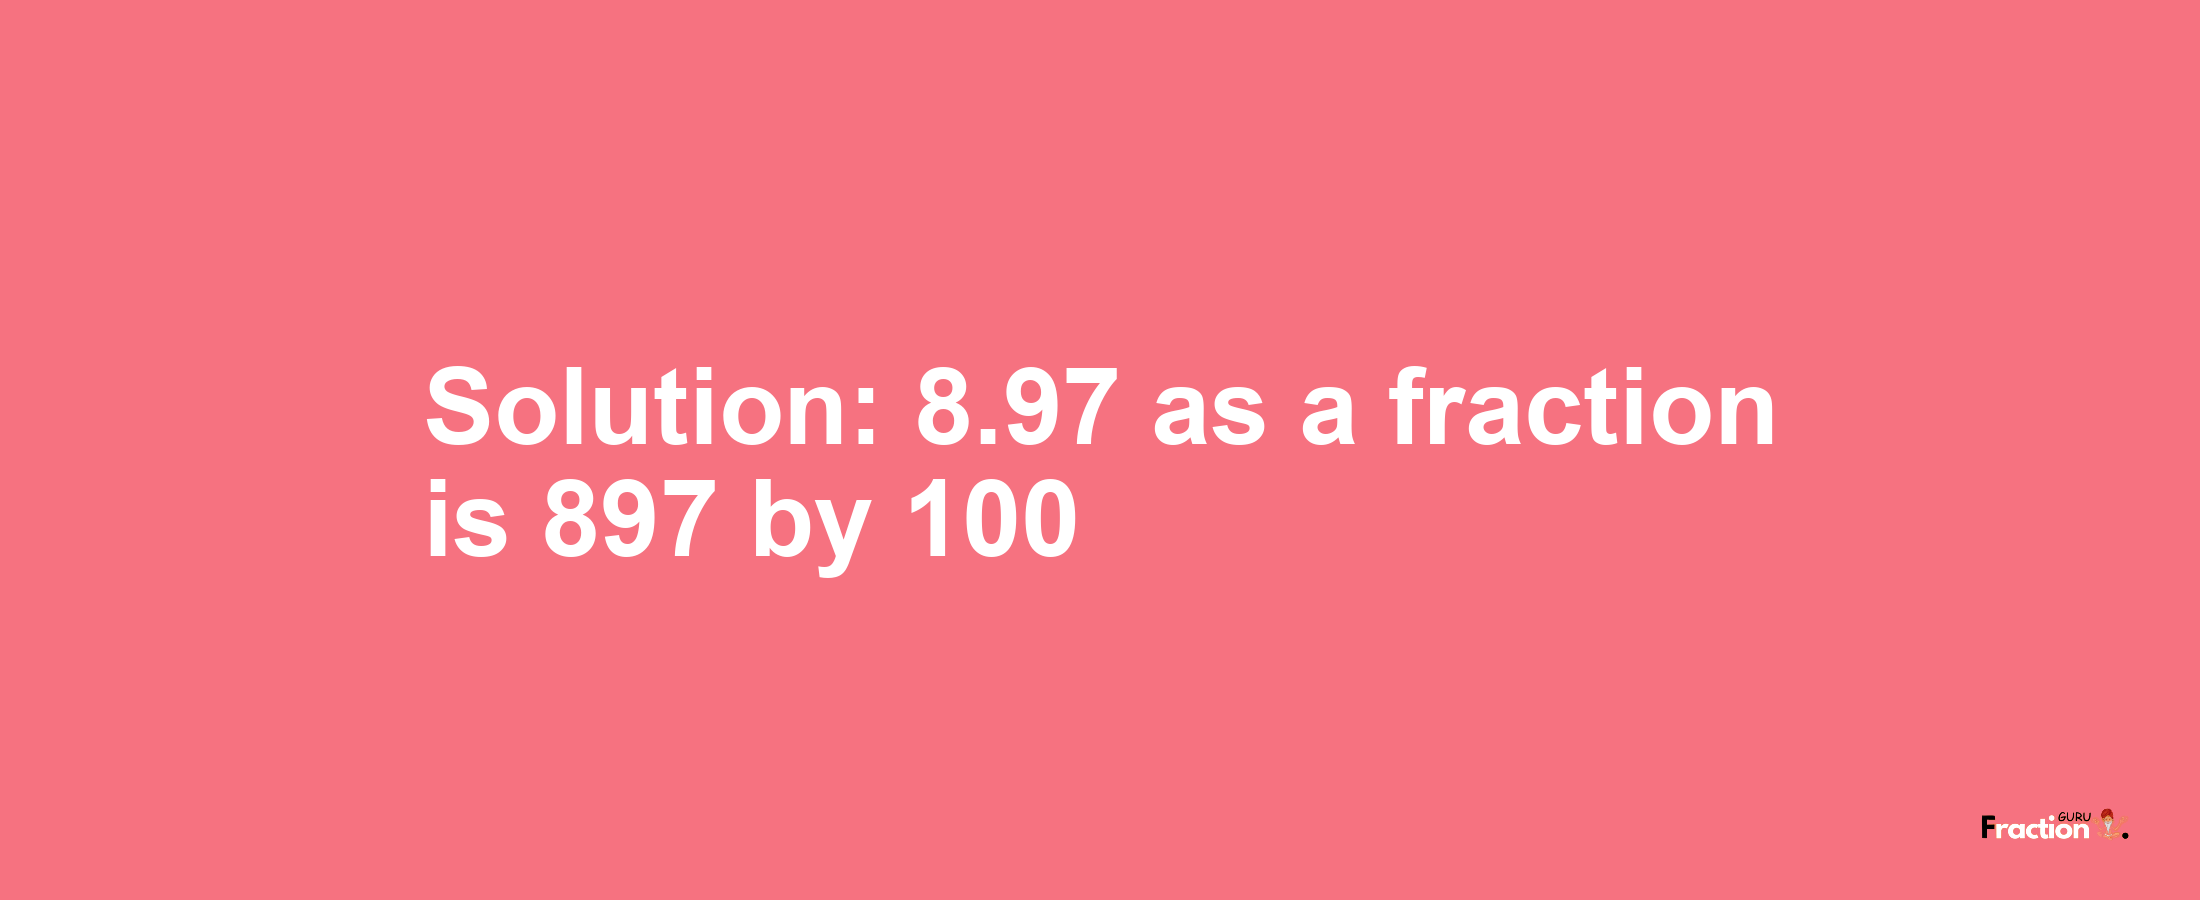 Solution:8.97 as a fraction is 897/100